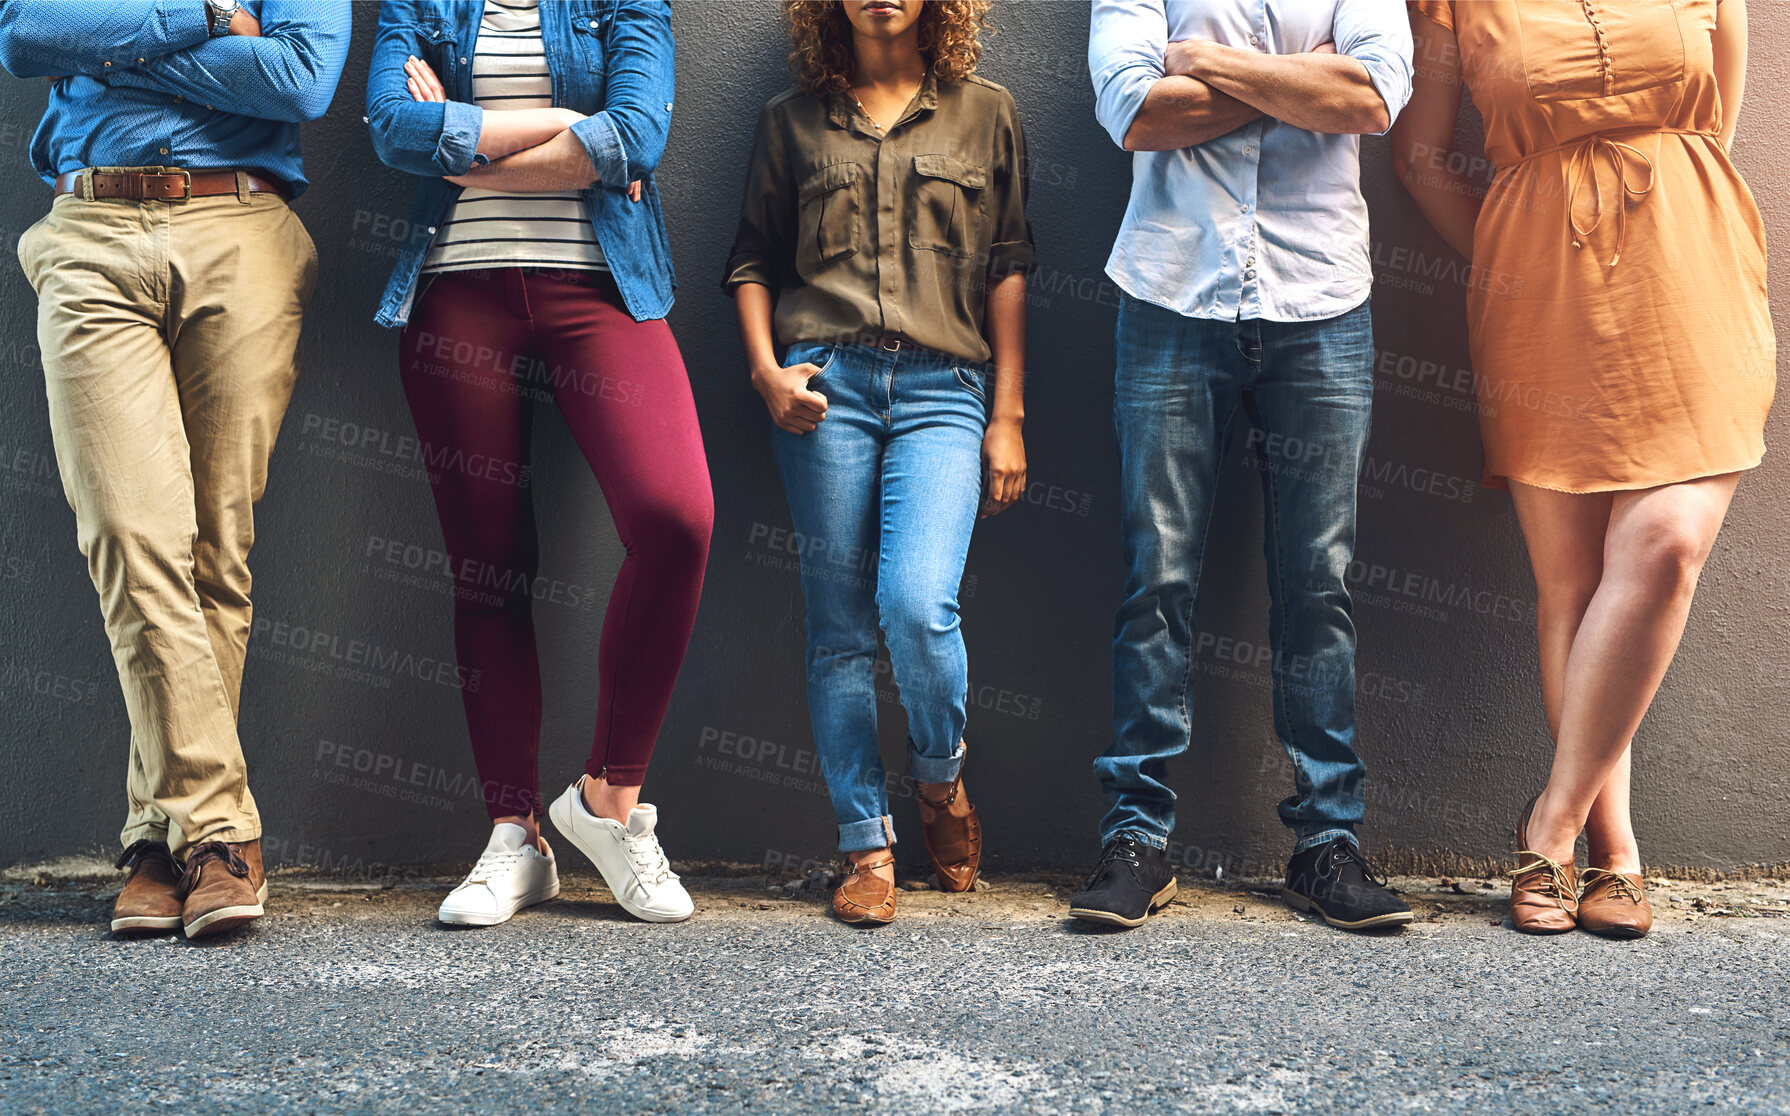 Buy stock photo Shot of a group unrecognizable people leaning against a wall while posing for a photo outside